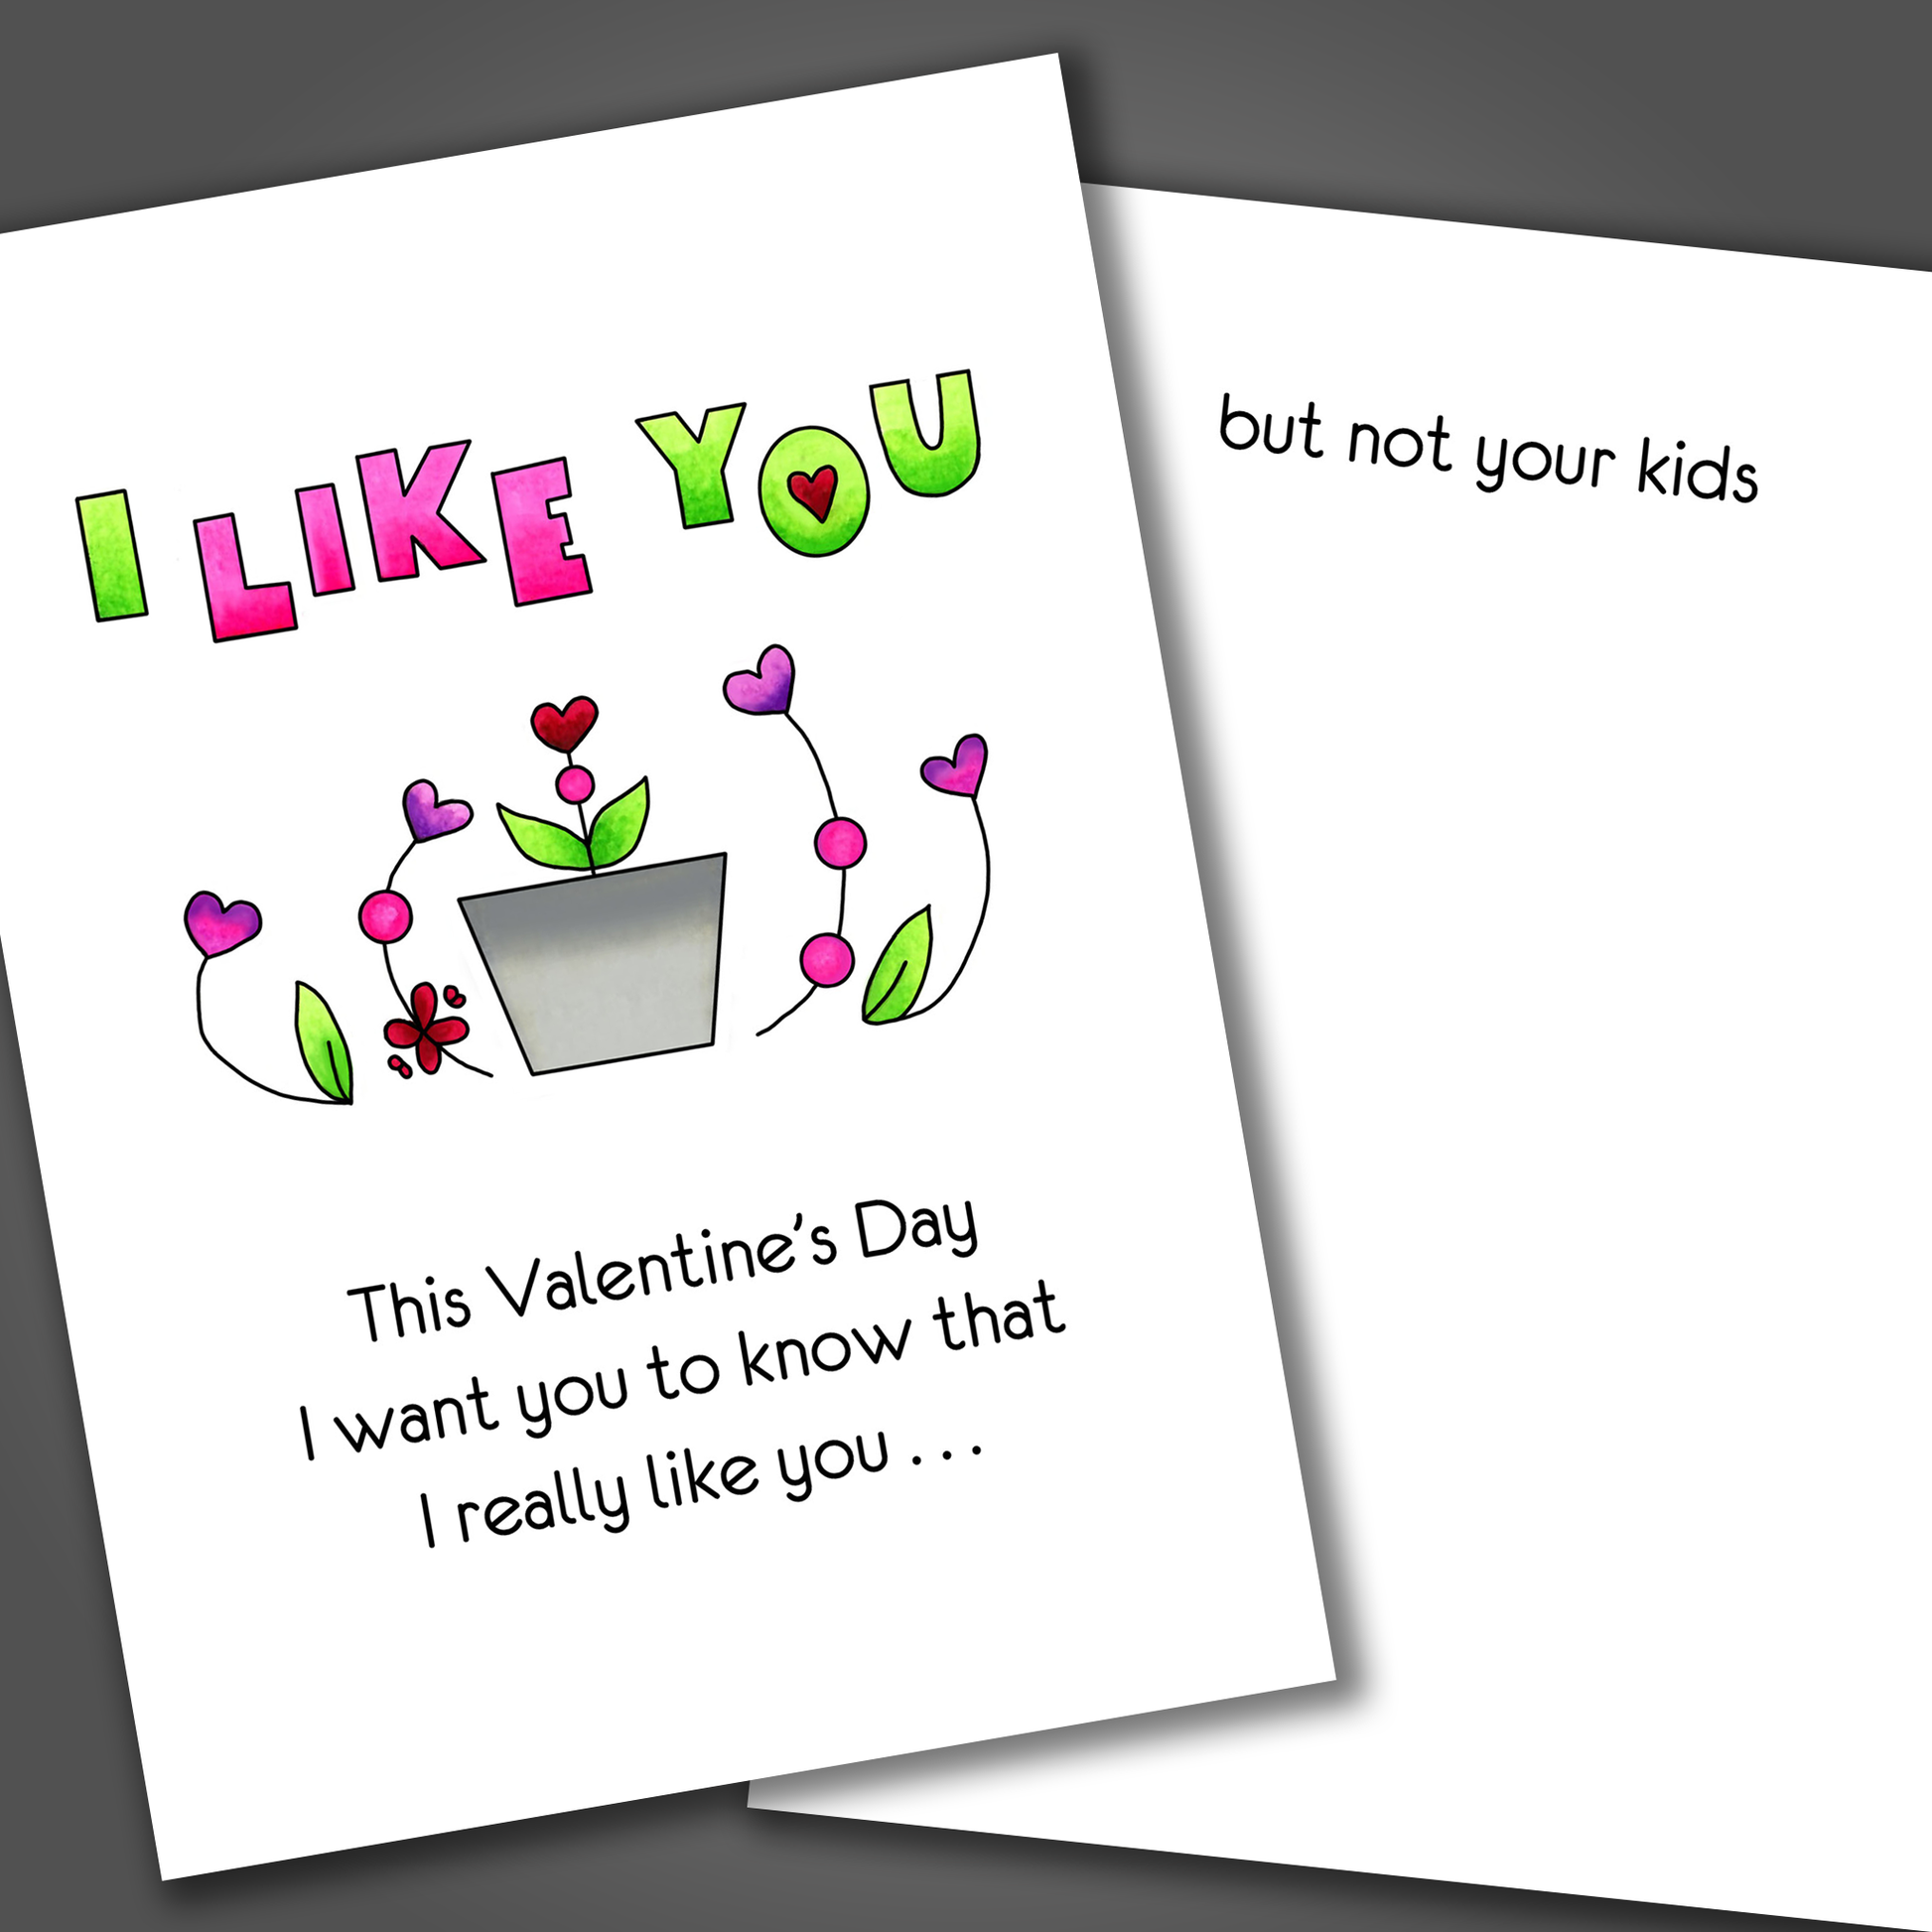 Funny Valentine's day card with potted plant drawn on the front with the words I like you in green and pink. Inside the card is a funny joke that says but not your kids.